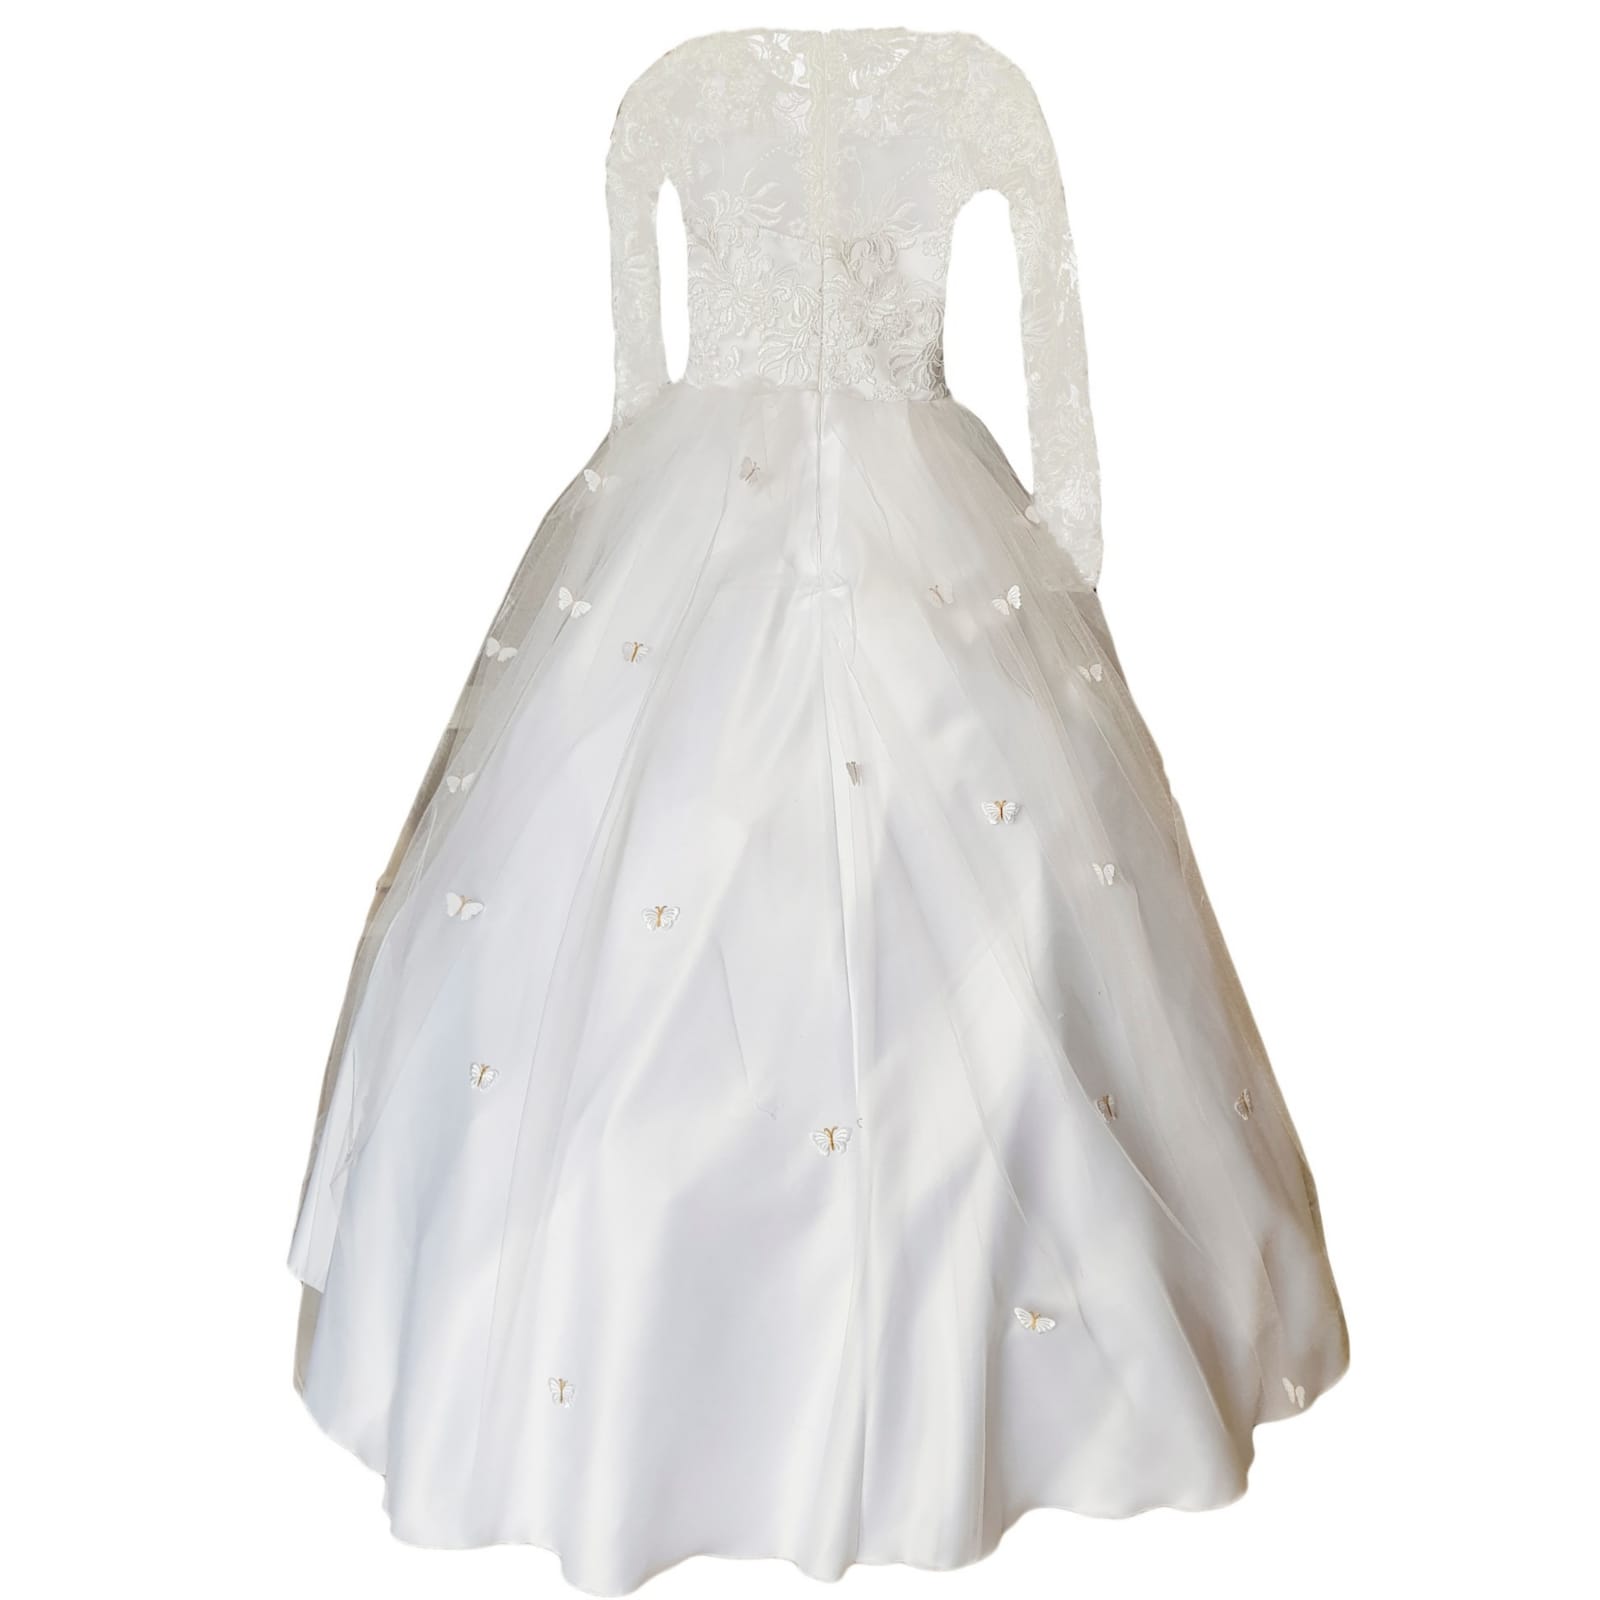 White holy communion ball gown dress 4 white holy communion ball gown dress. With a lace bodice. Long lace sleeves. Holy communion dress detailed with butterflies.